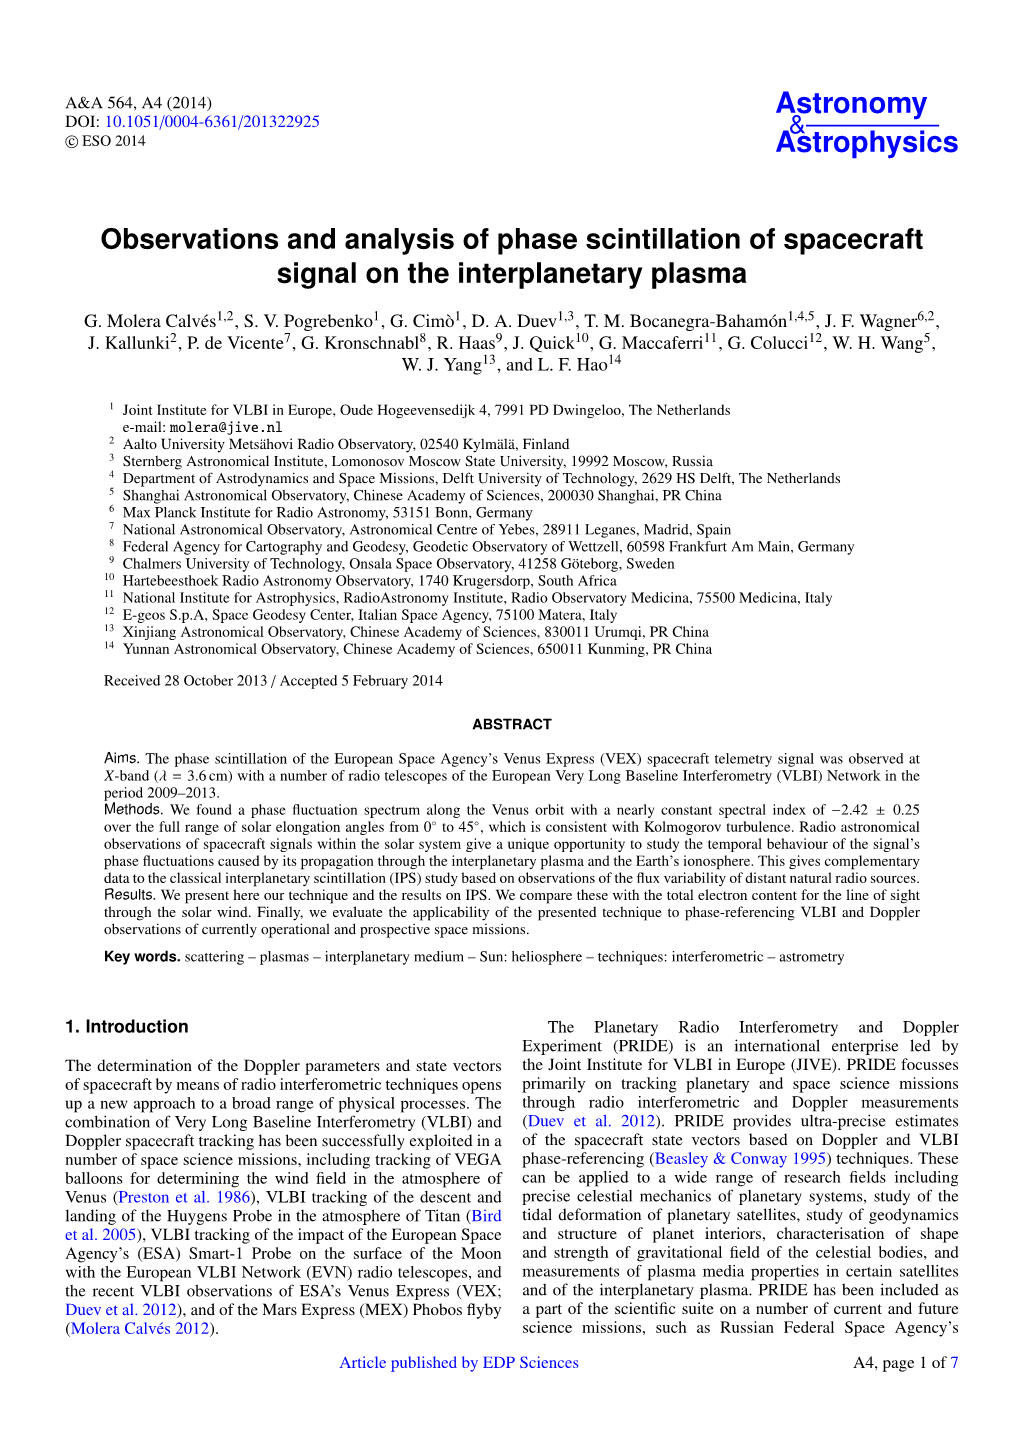 Observations and Analysis of Phase Scintillation of Spacecraft Signal on the Interplanetary Plasma